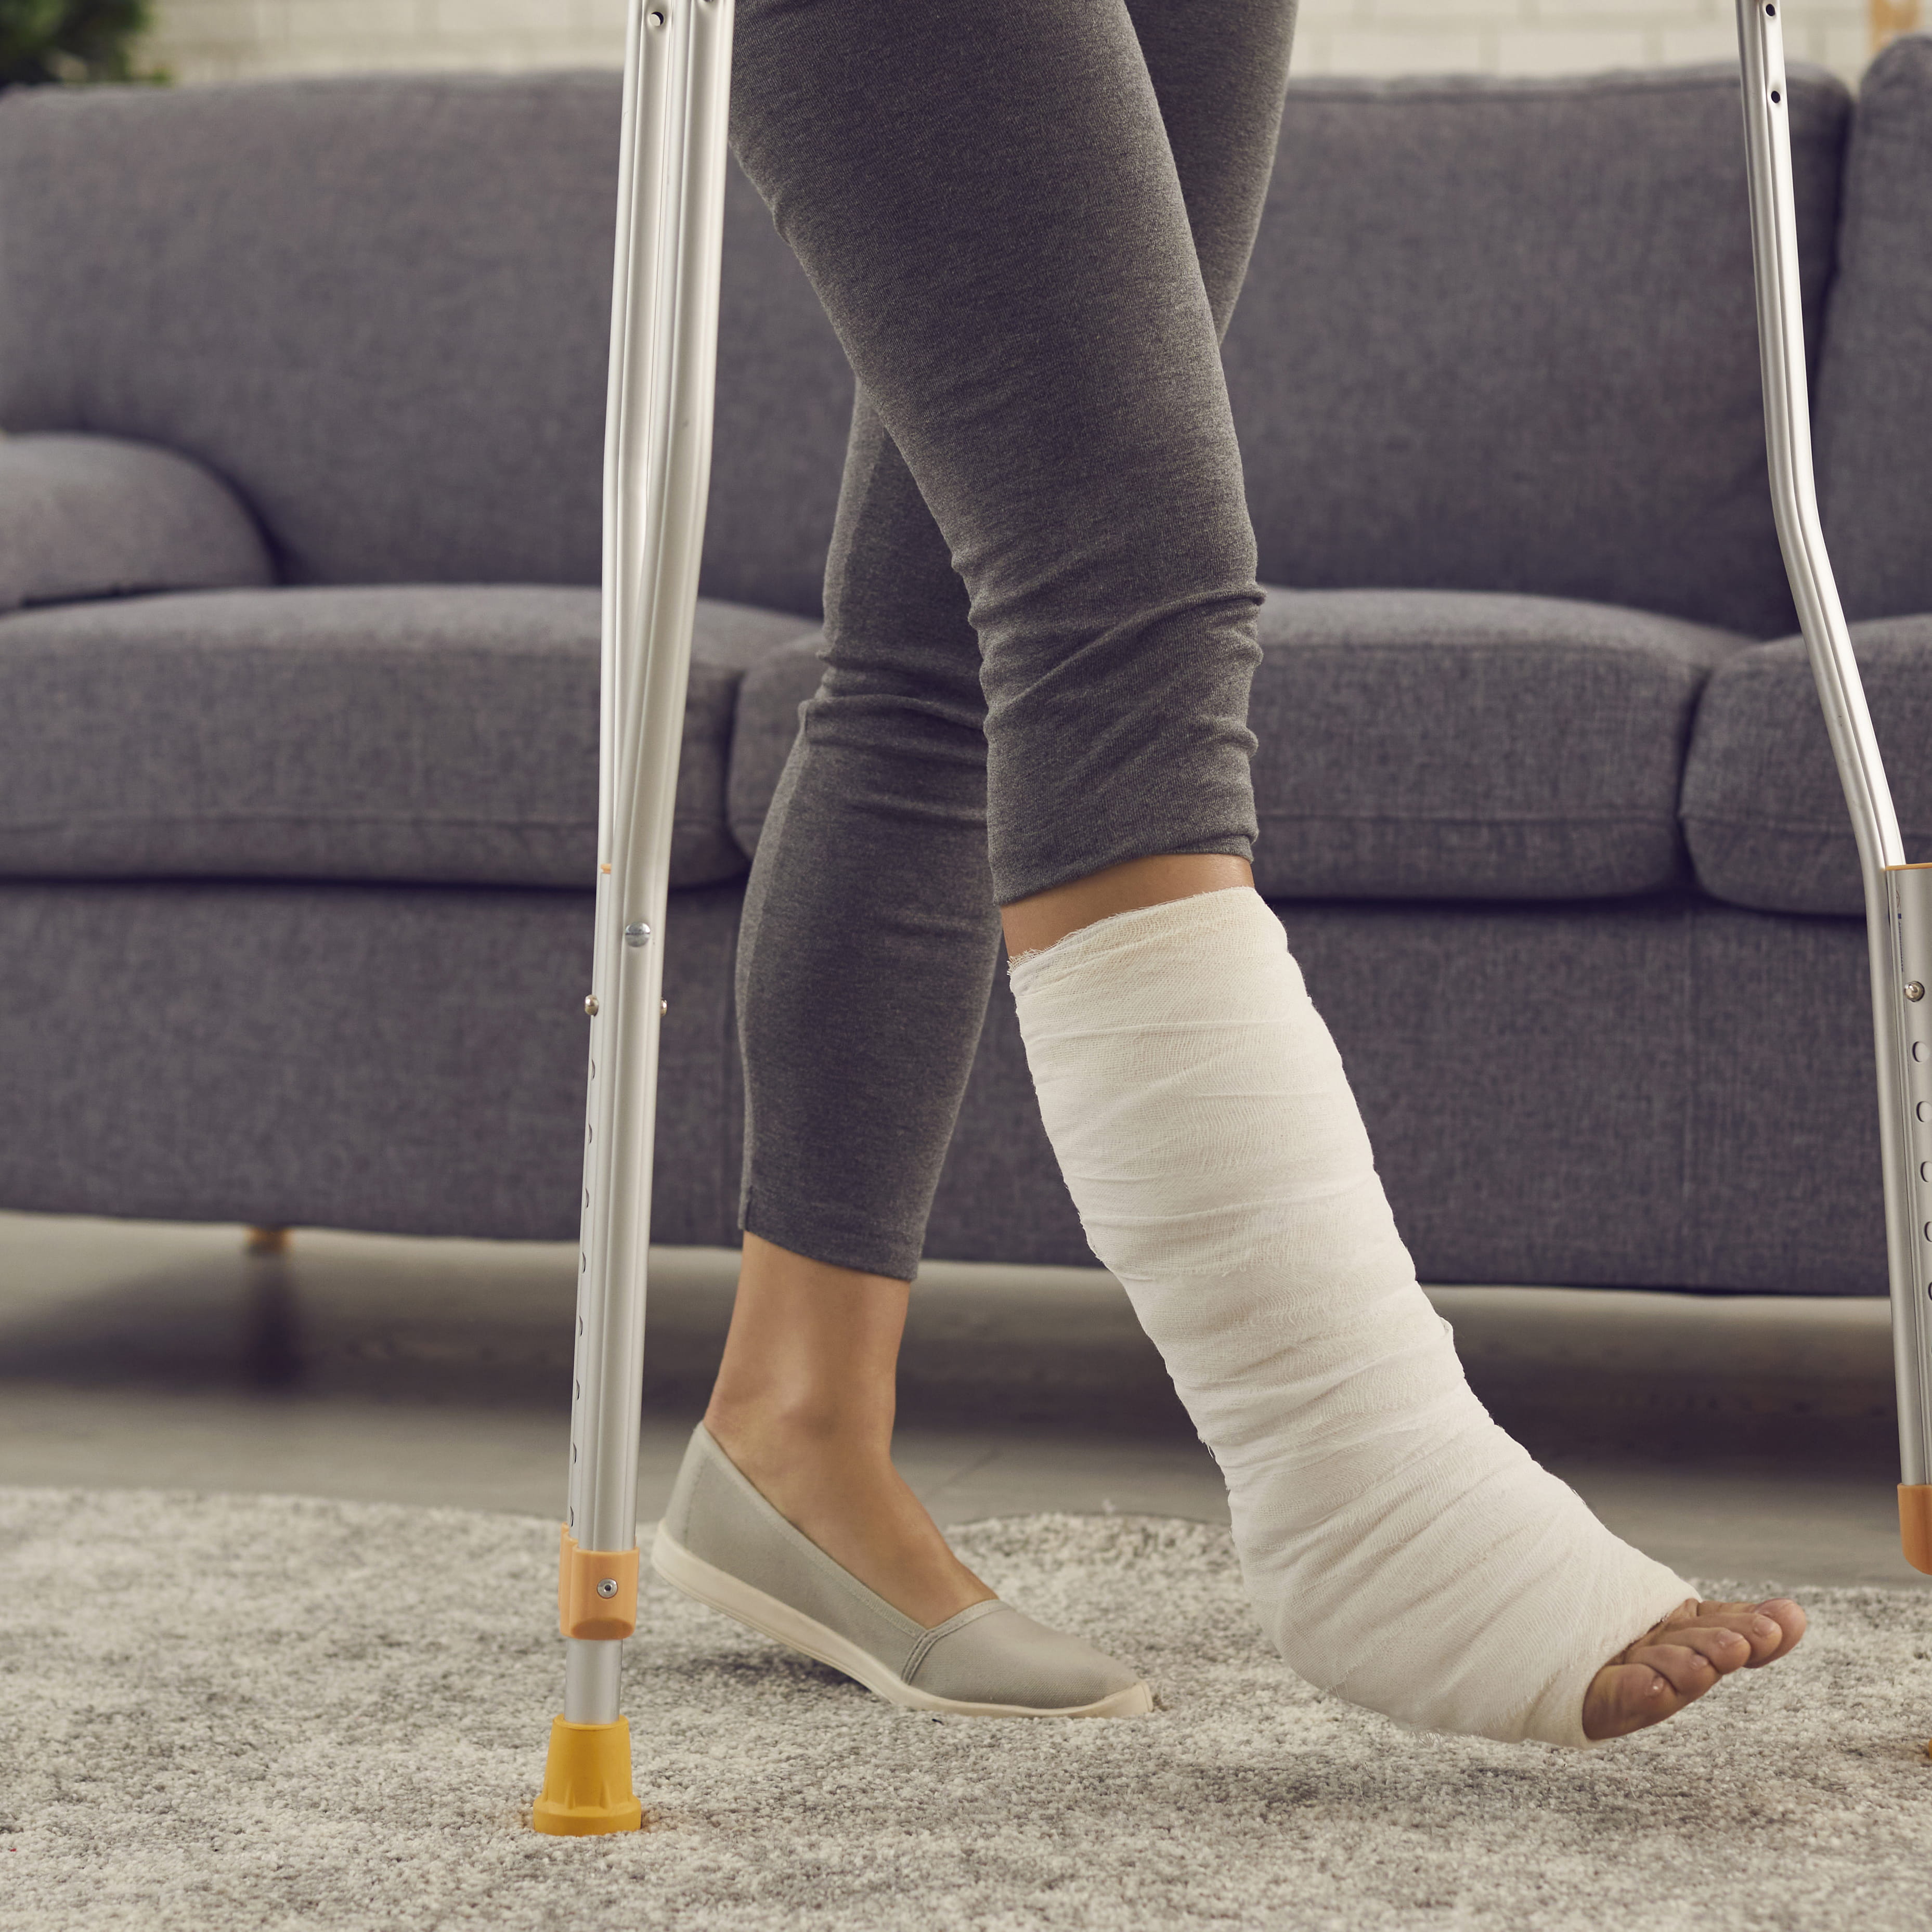 Physical Therapy After Ankle Surgery: What to Expect